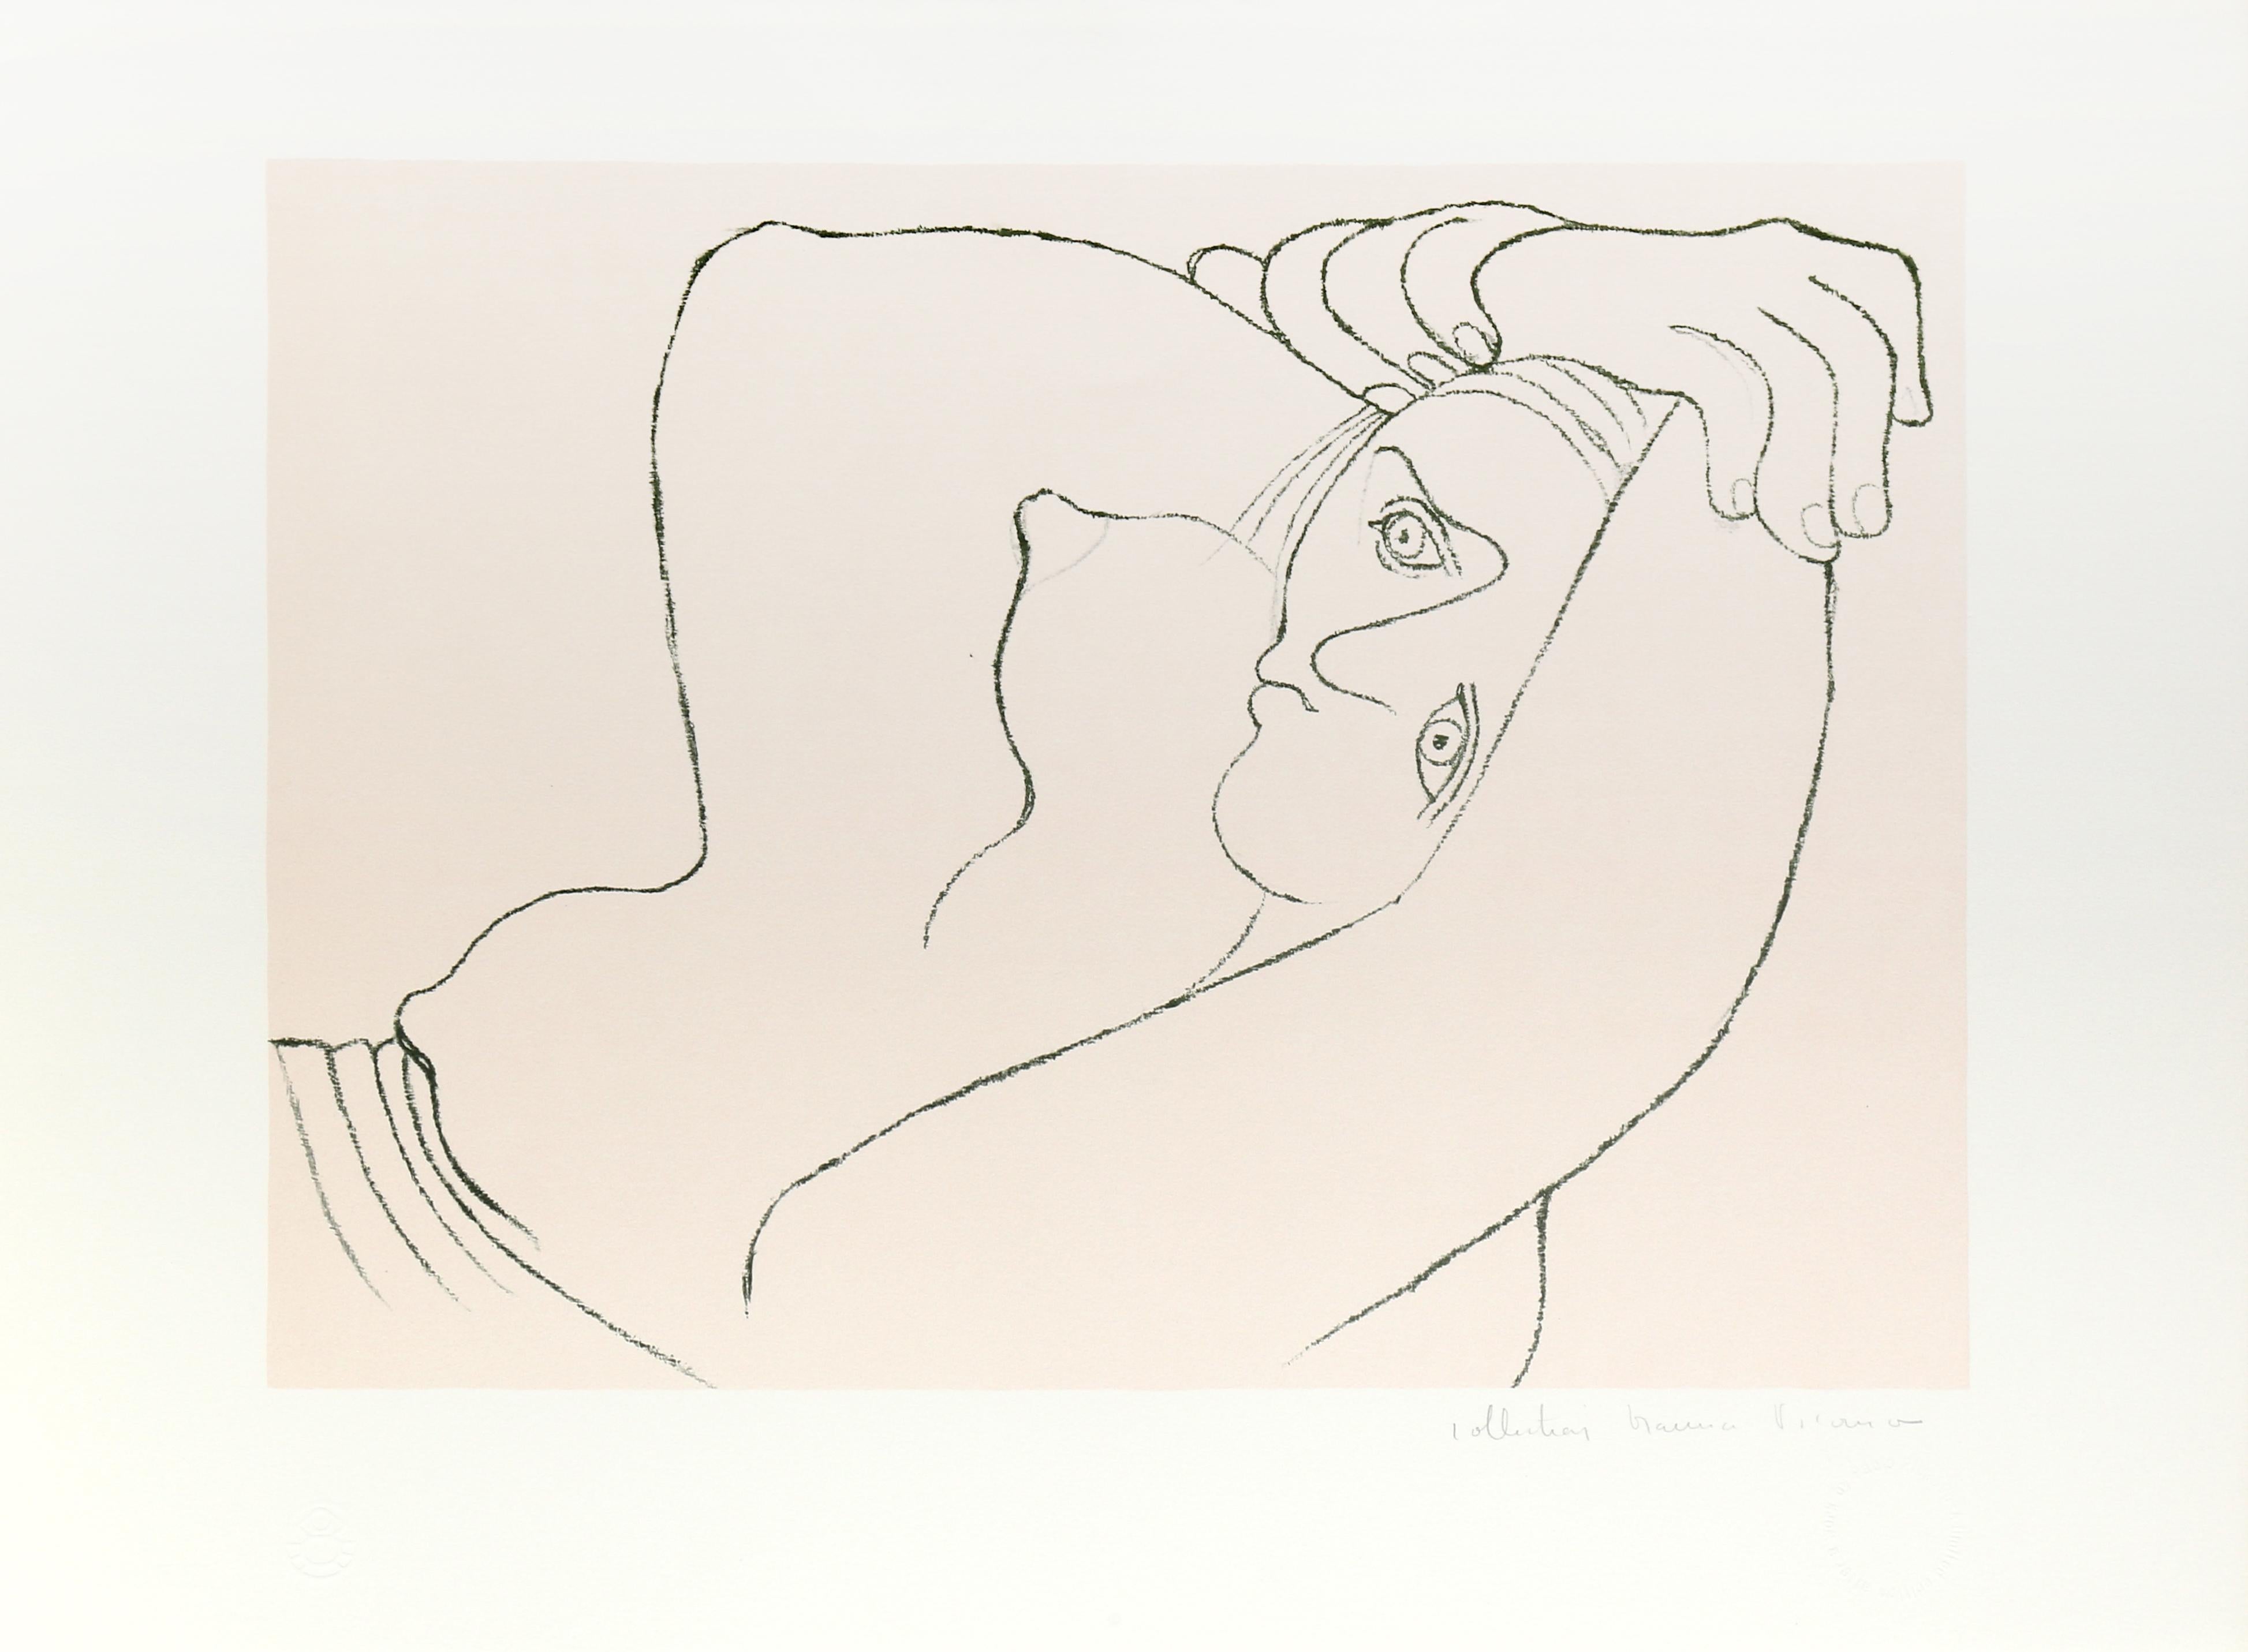 Shaded in soft hues of grey and yellow, the woman represented in Pablo Picasso's print is rendered in a Cubist style with flowing lines and forms. With her arms stretched over her head as she rests, the woman's top has fallen and her chest is